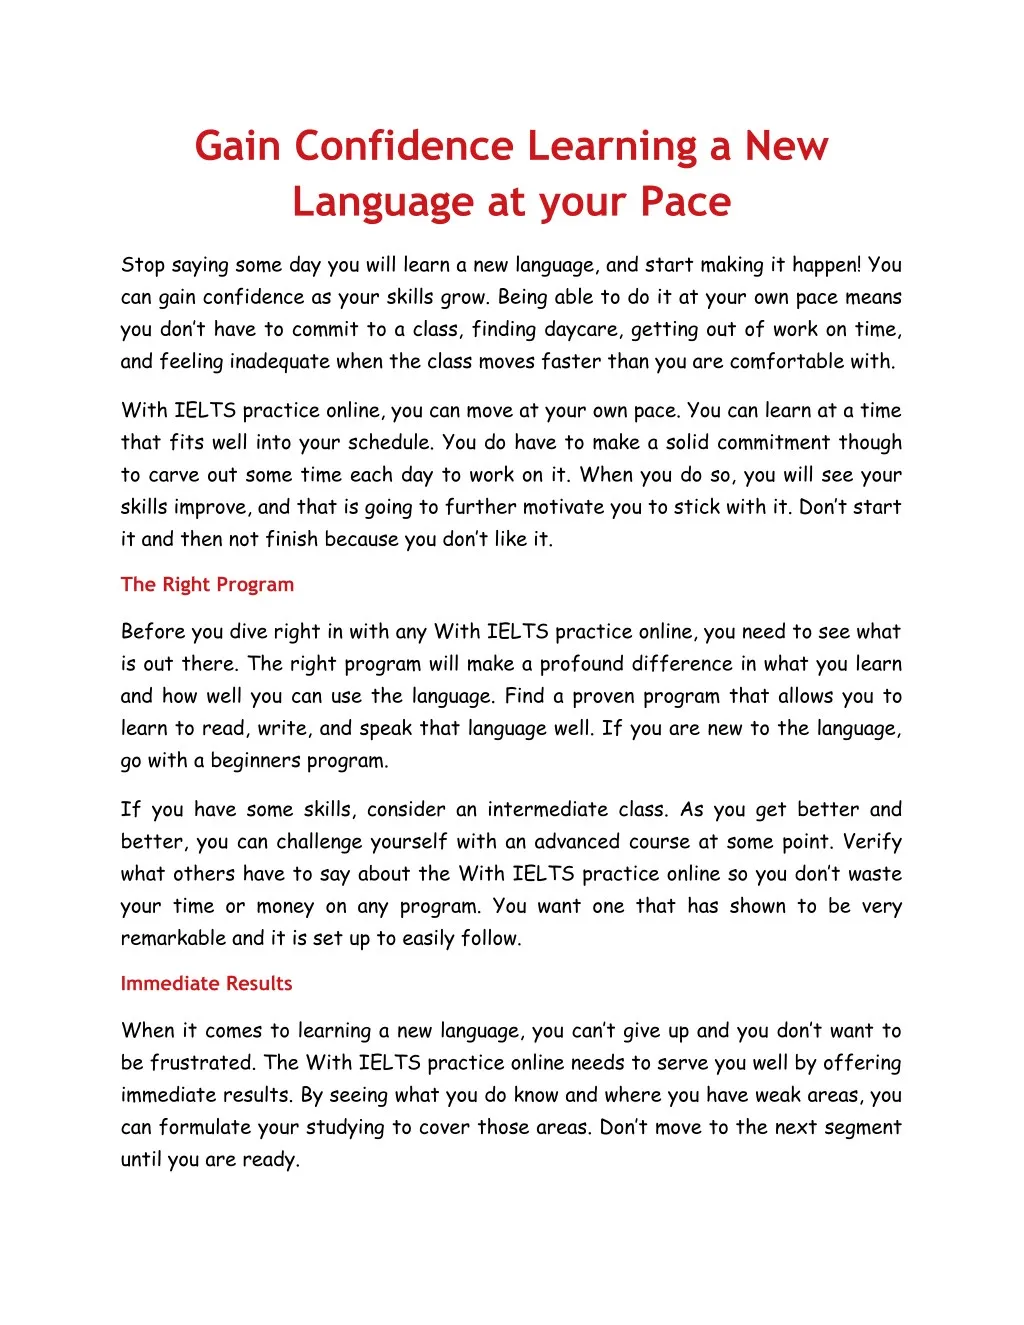 gain confidence learning a new language at your